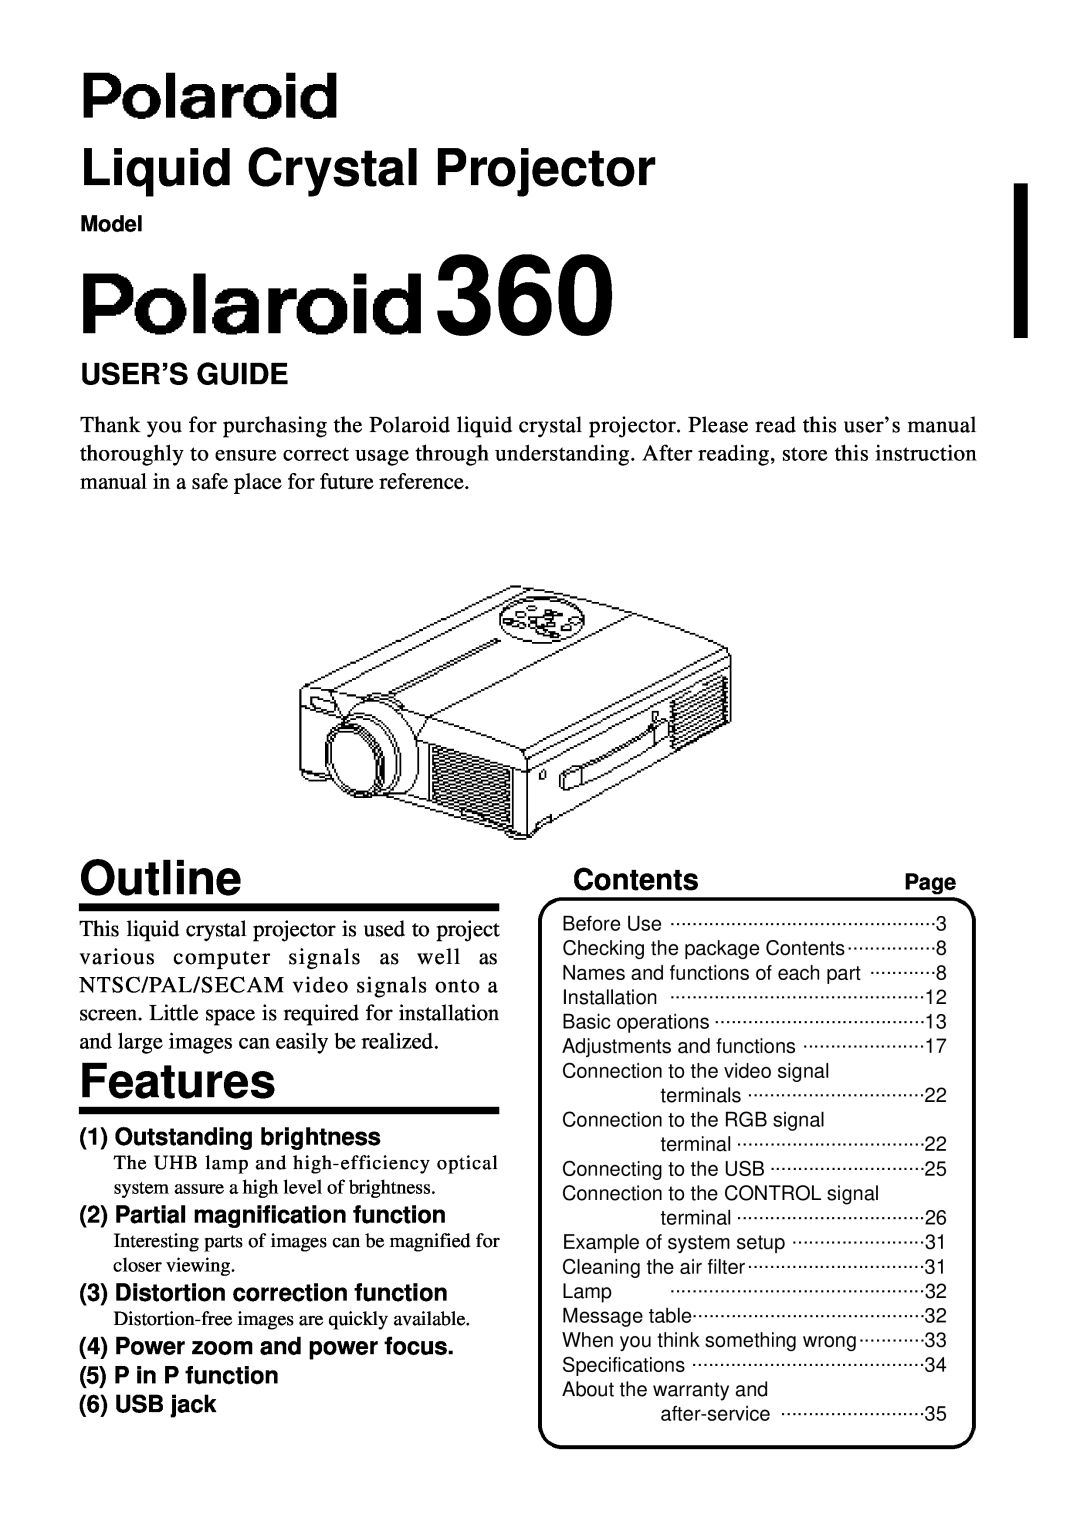 Polaroid PV 360 specifications Outline, Features, Liquid Crystal Projector, Outstanding brightness, Model, Page 